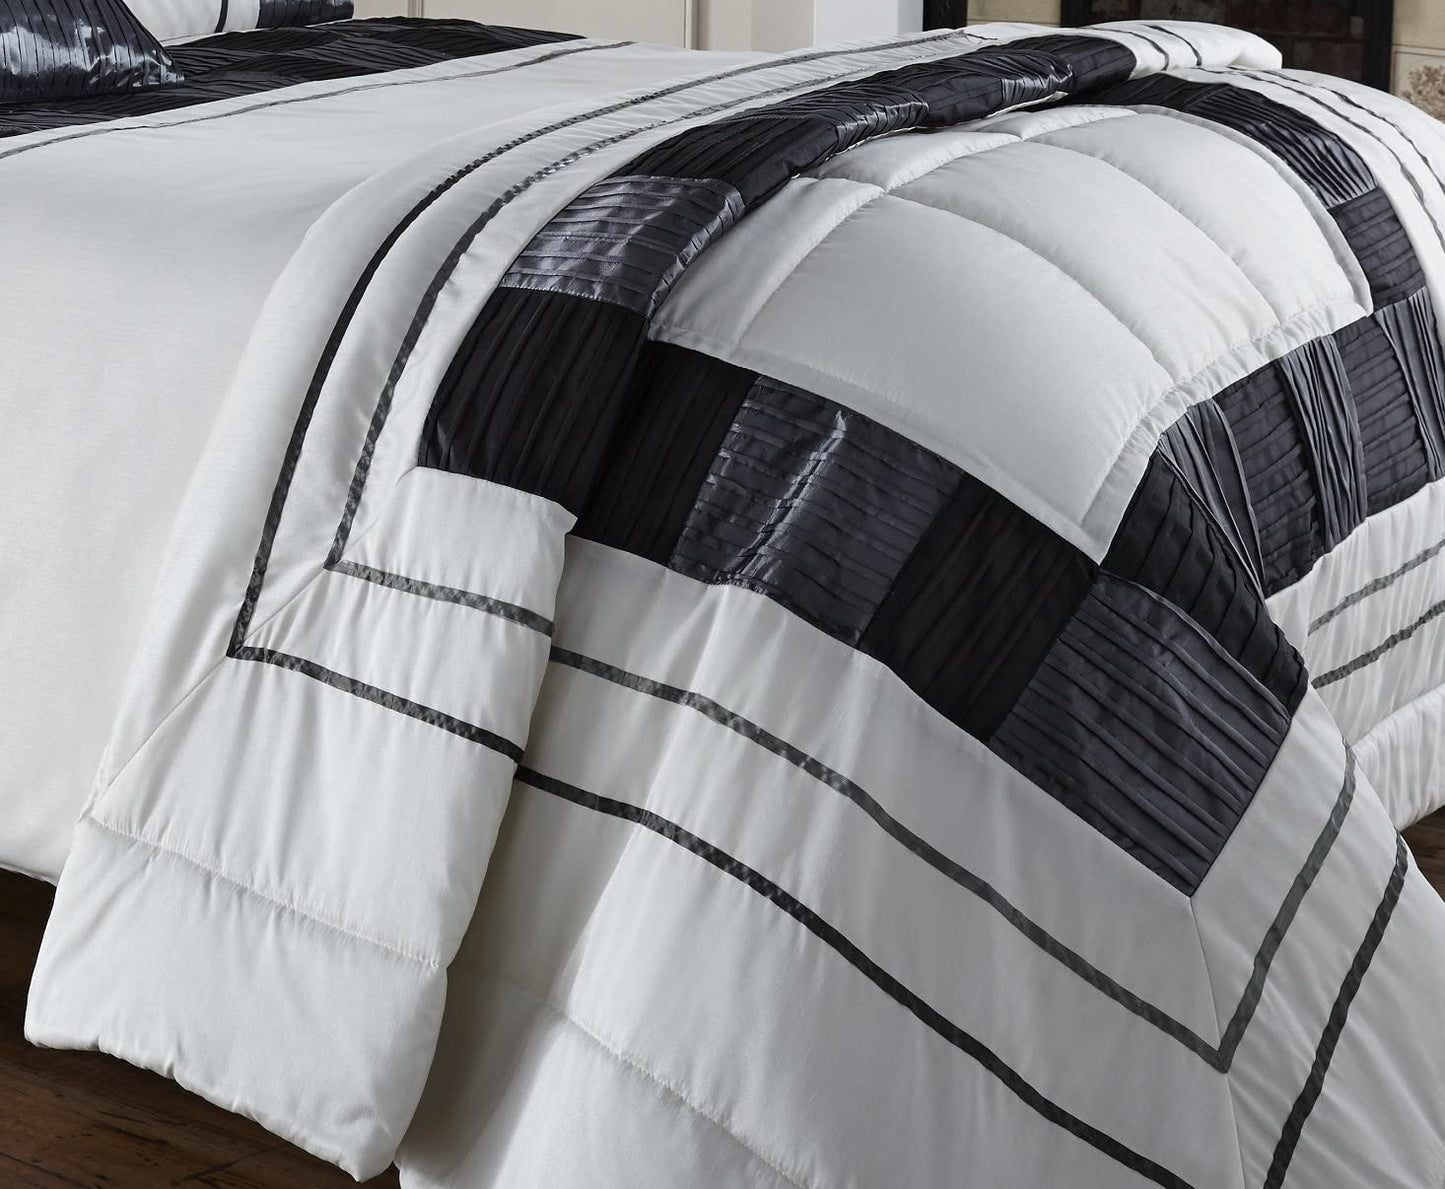 Quilted Bedspread Throwover Cubic Cream Black Metallic Silver 150cm x 200cm